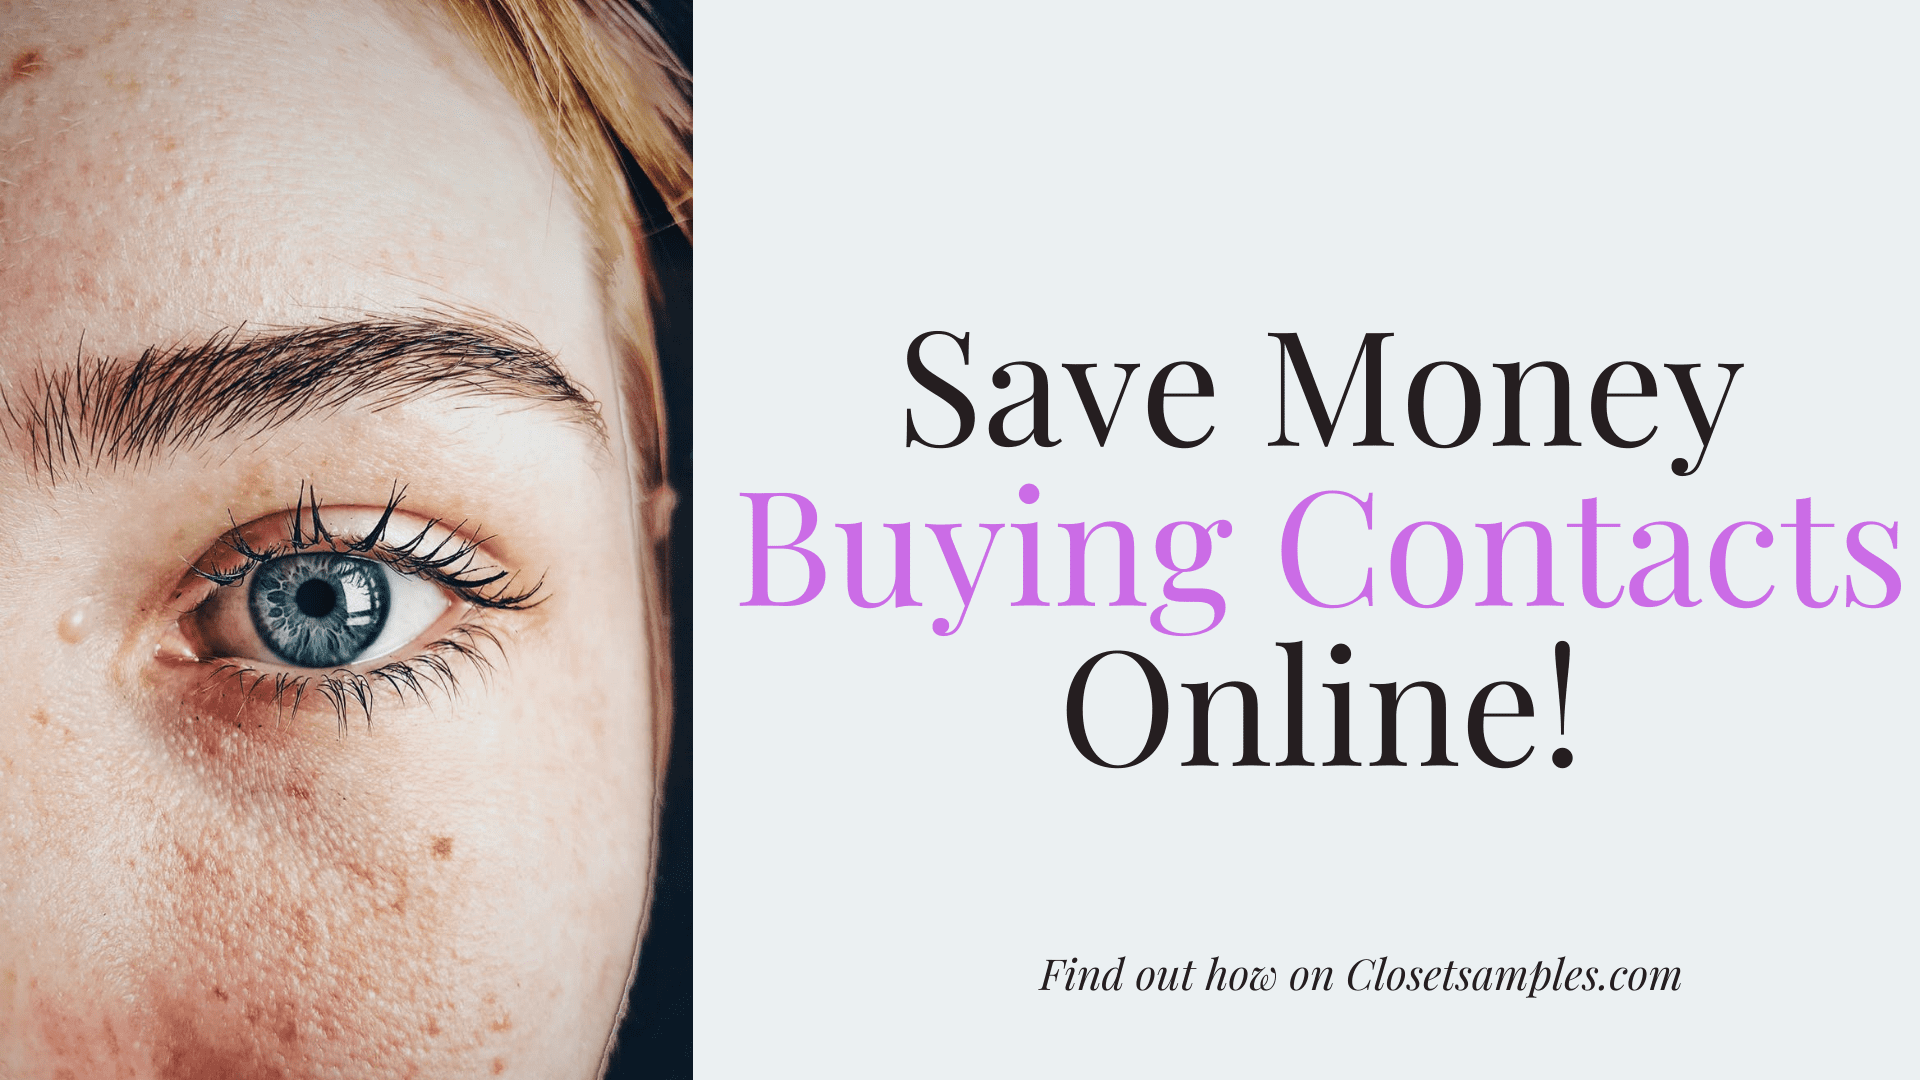 Save Money Buying Contacts Onl...